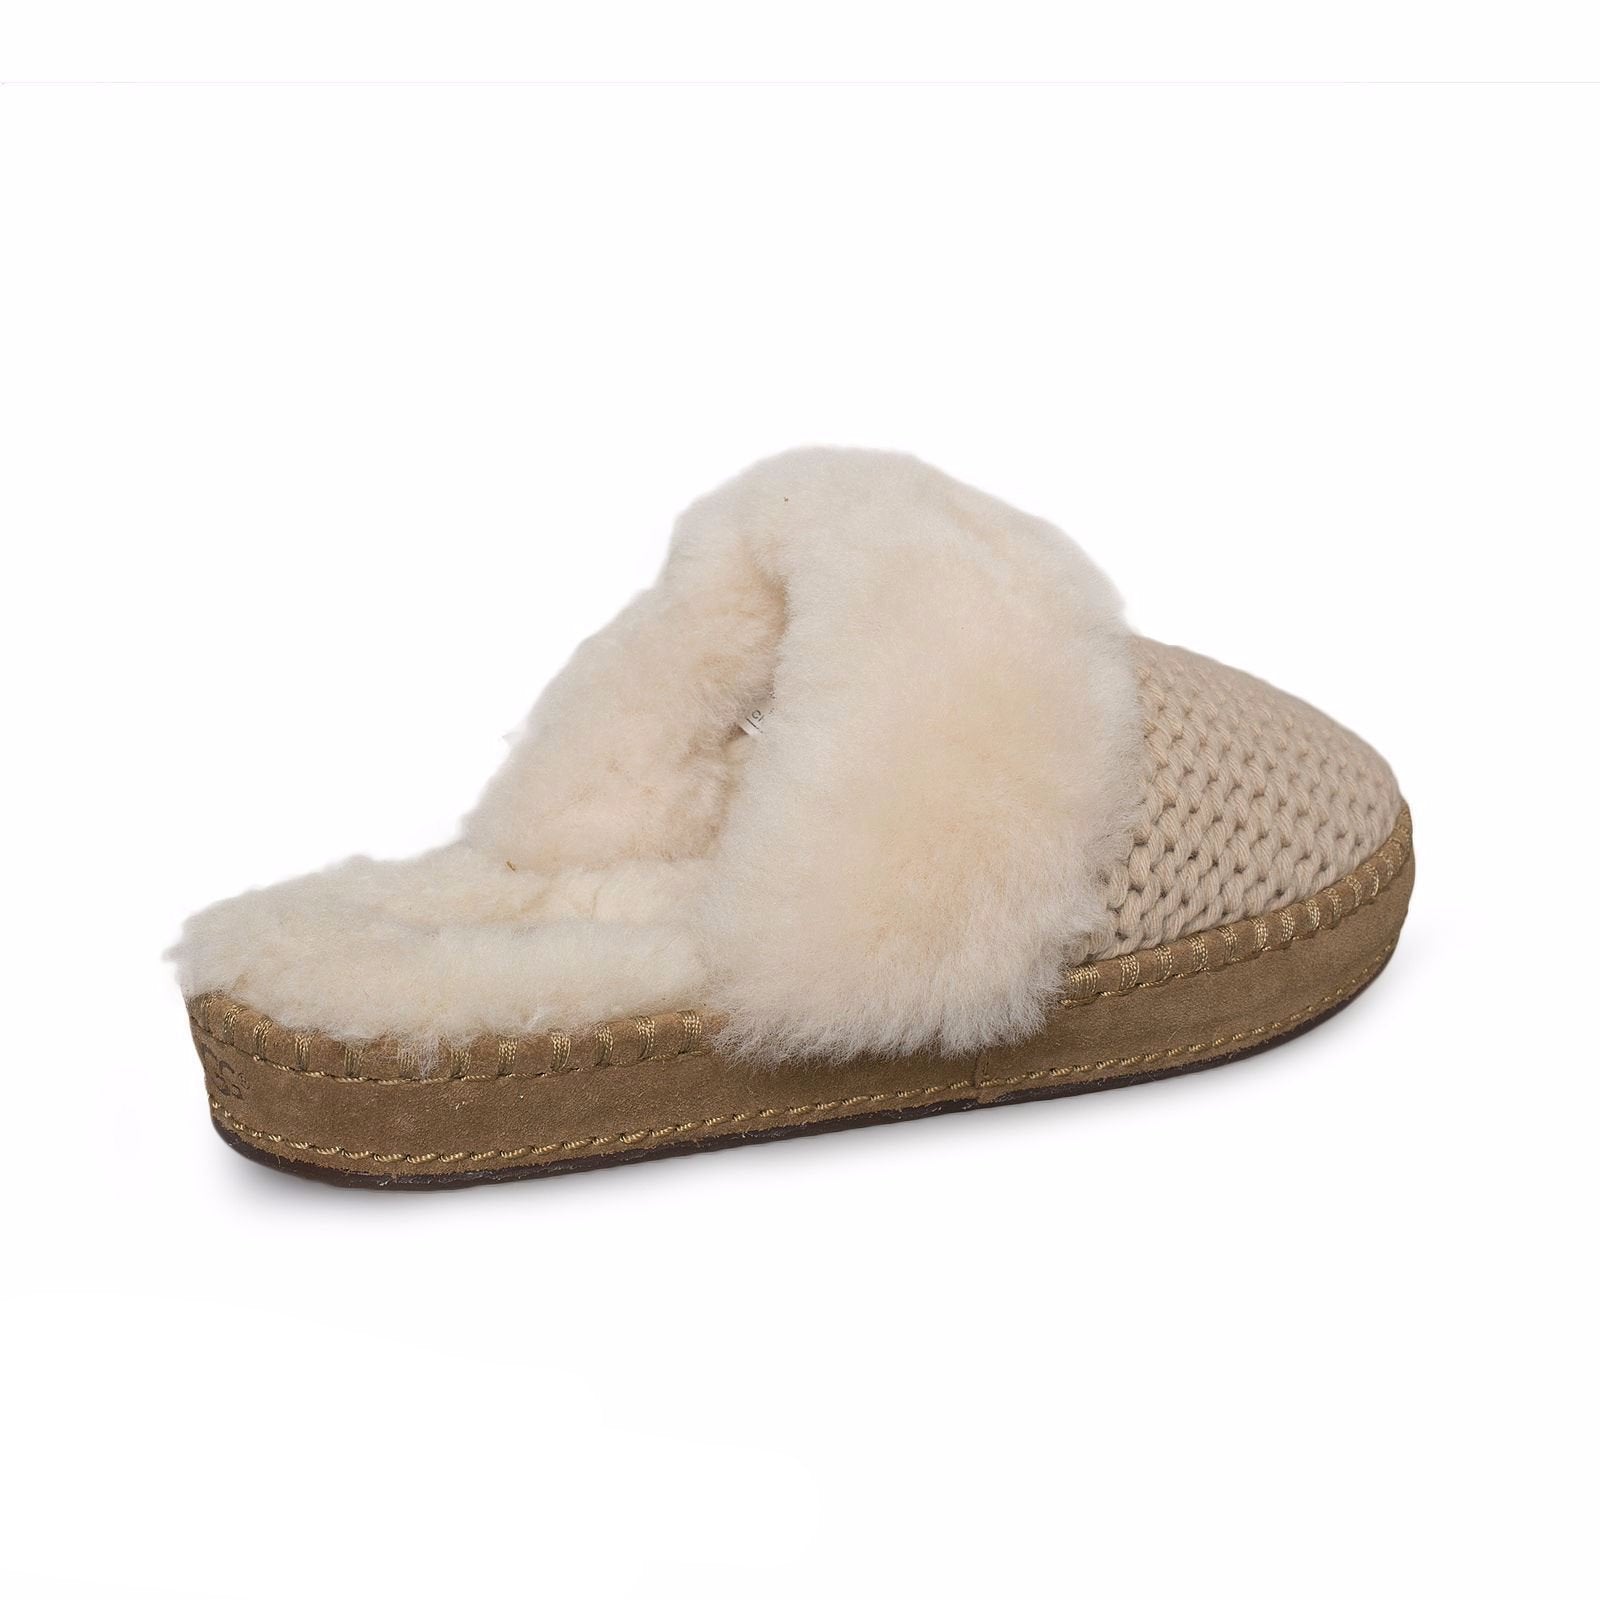 ugg aira knit slippers size 9